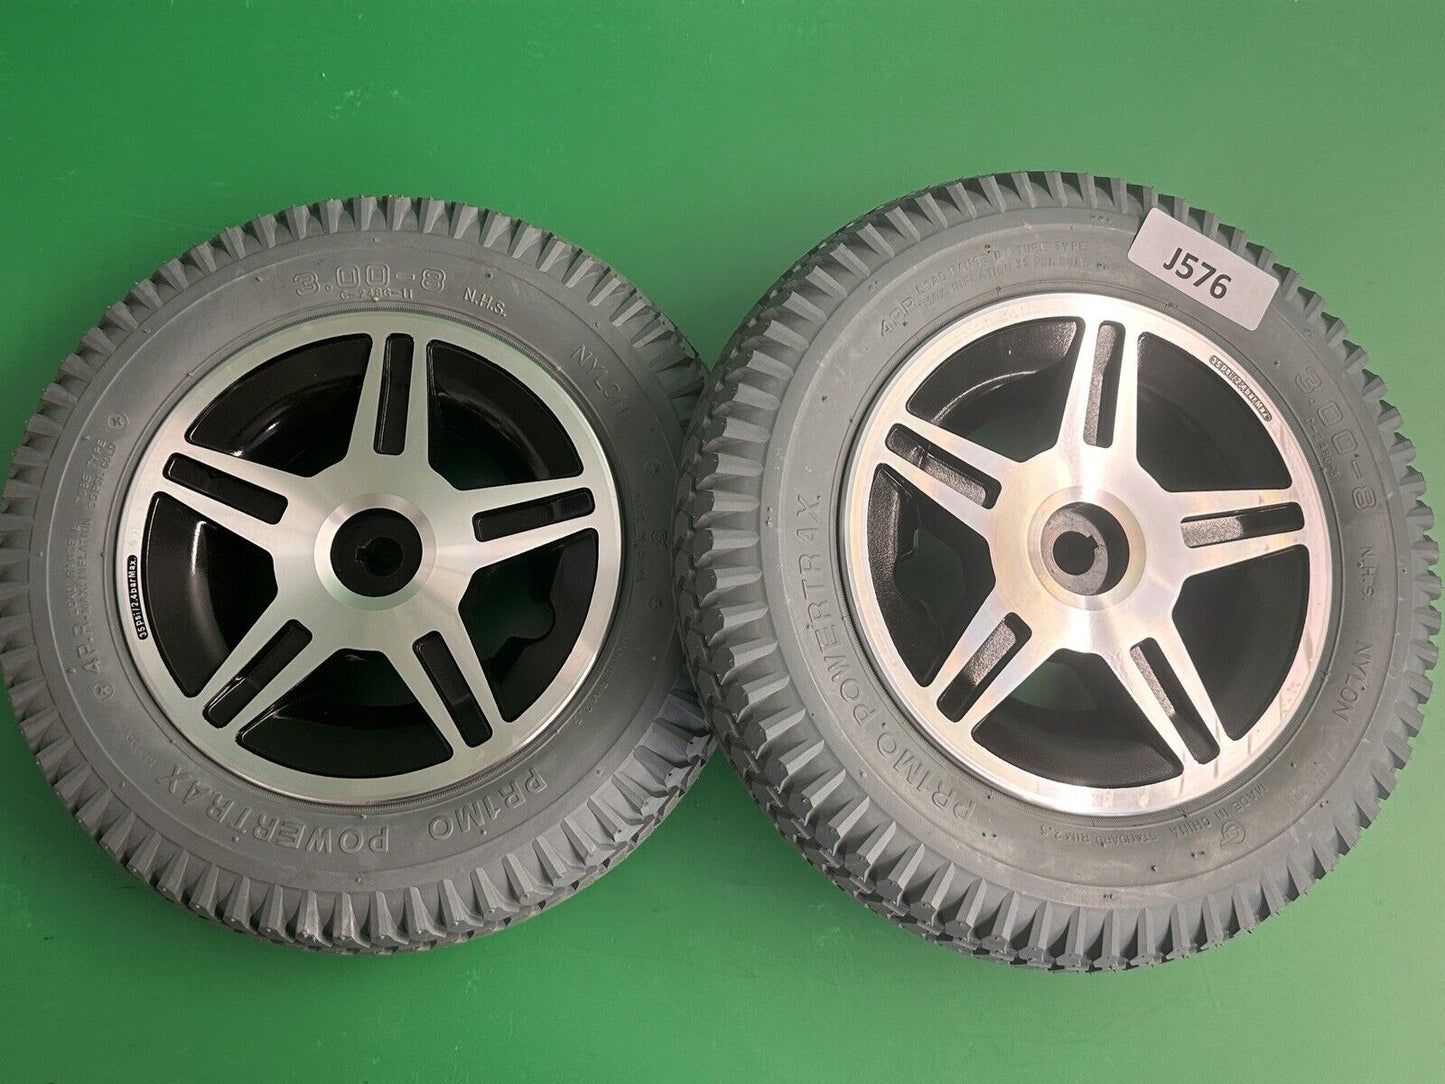 14"x3" MINT* Drive Wheels for the Quantum 600 & Jazzy 600 Power Wheelchair #J576